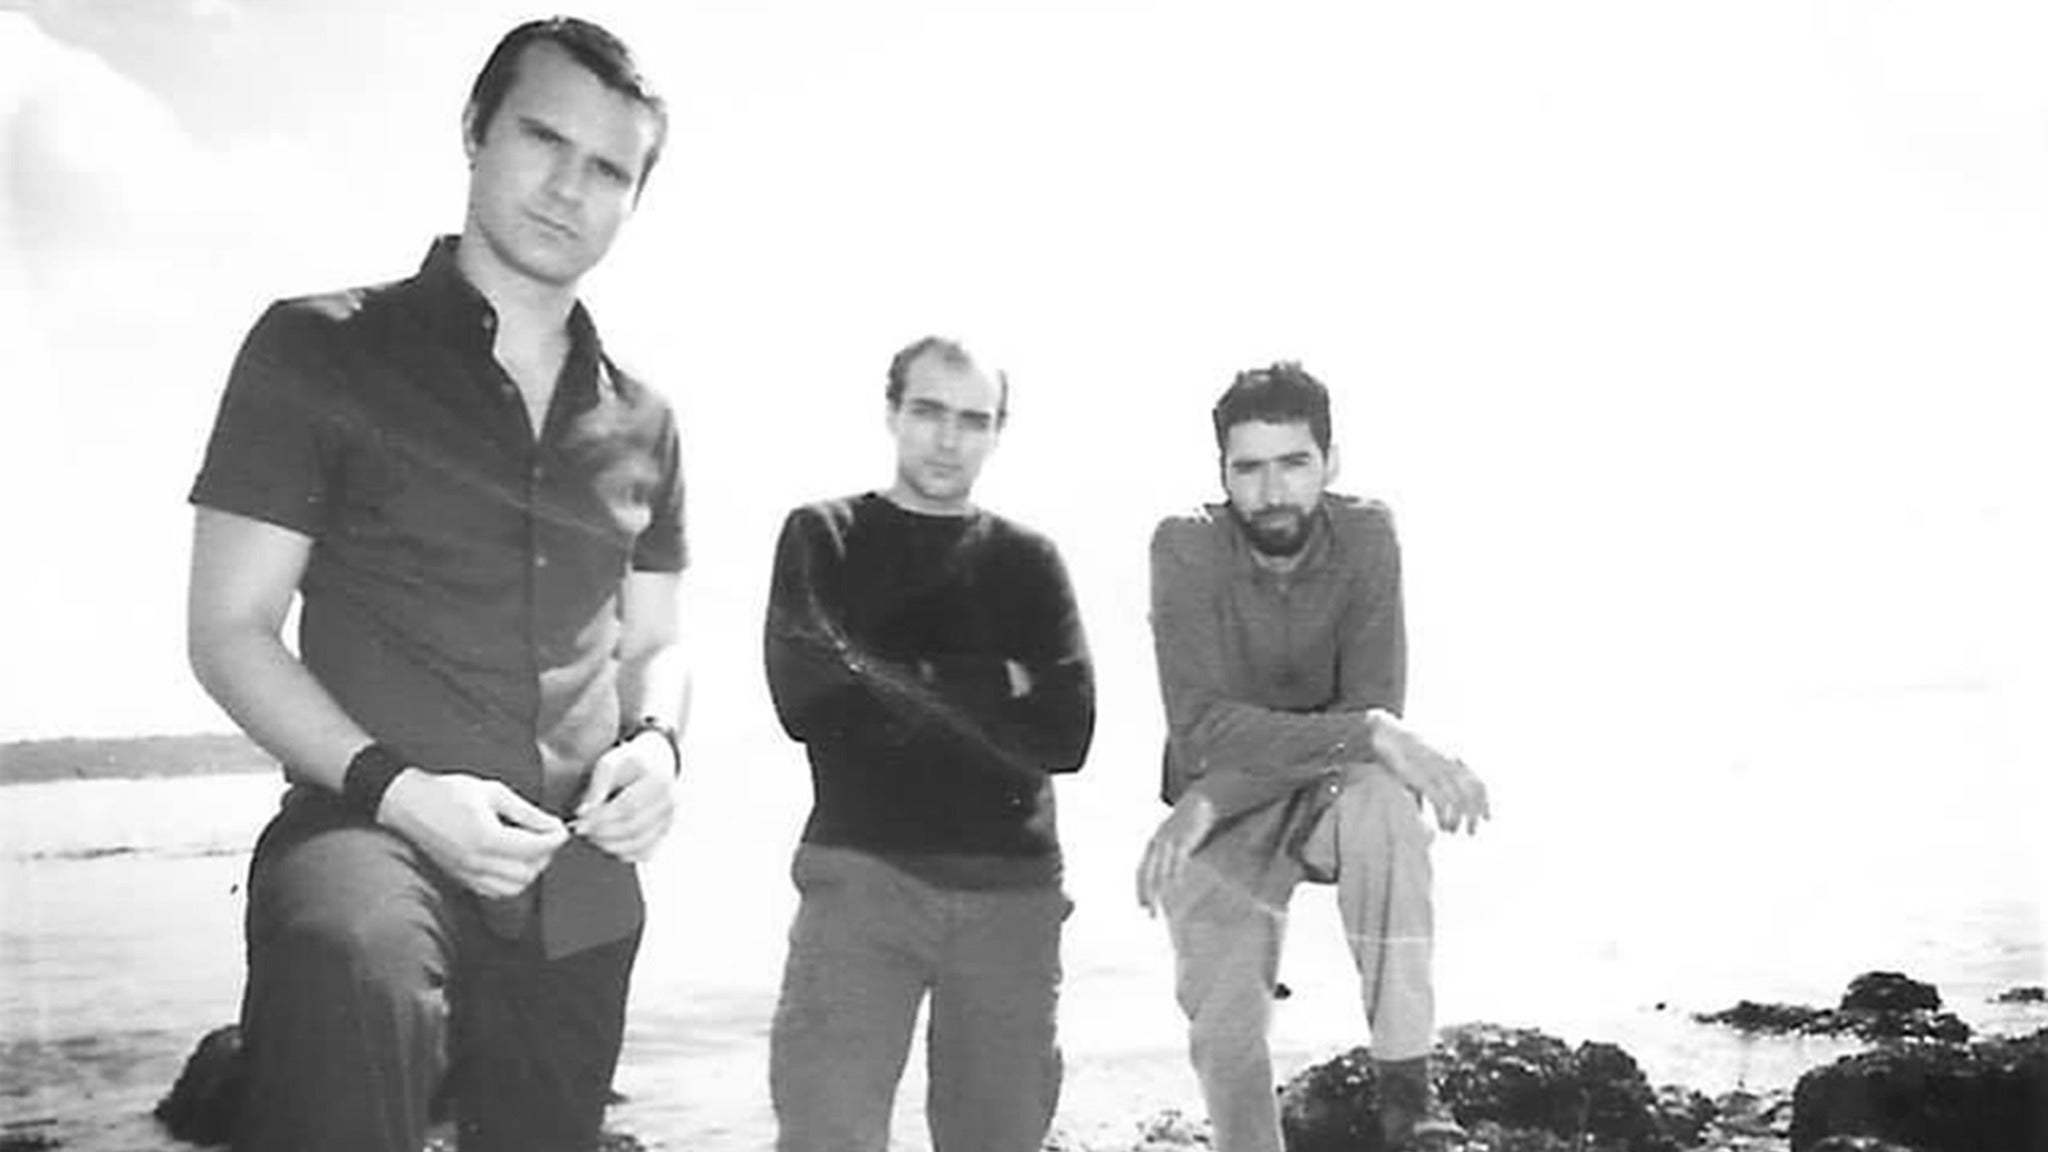 Sunny Day Real Estate - Midwest & More Tour presale code for show tickets in Cincinnati, OH (Bogart's)